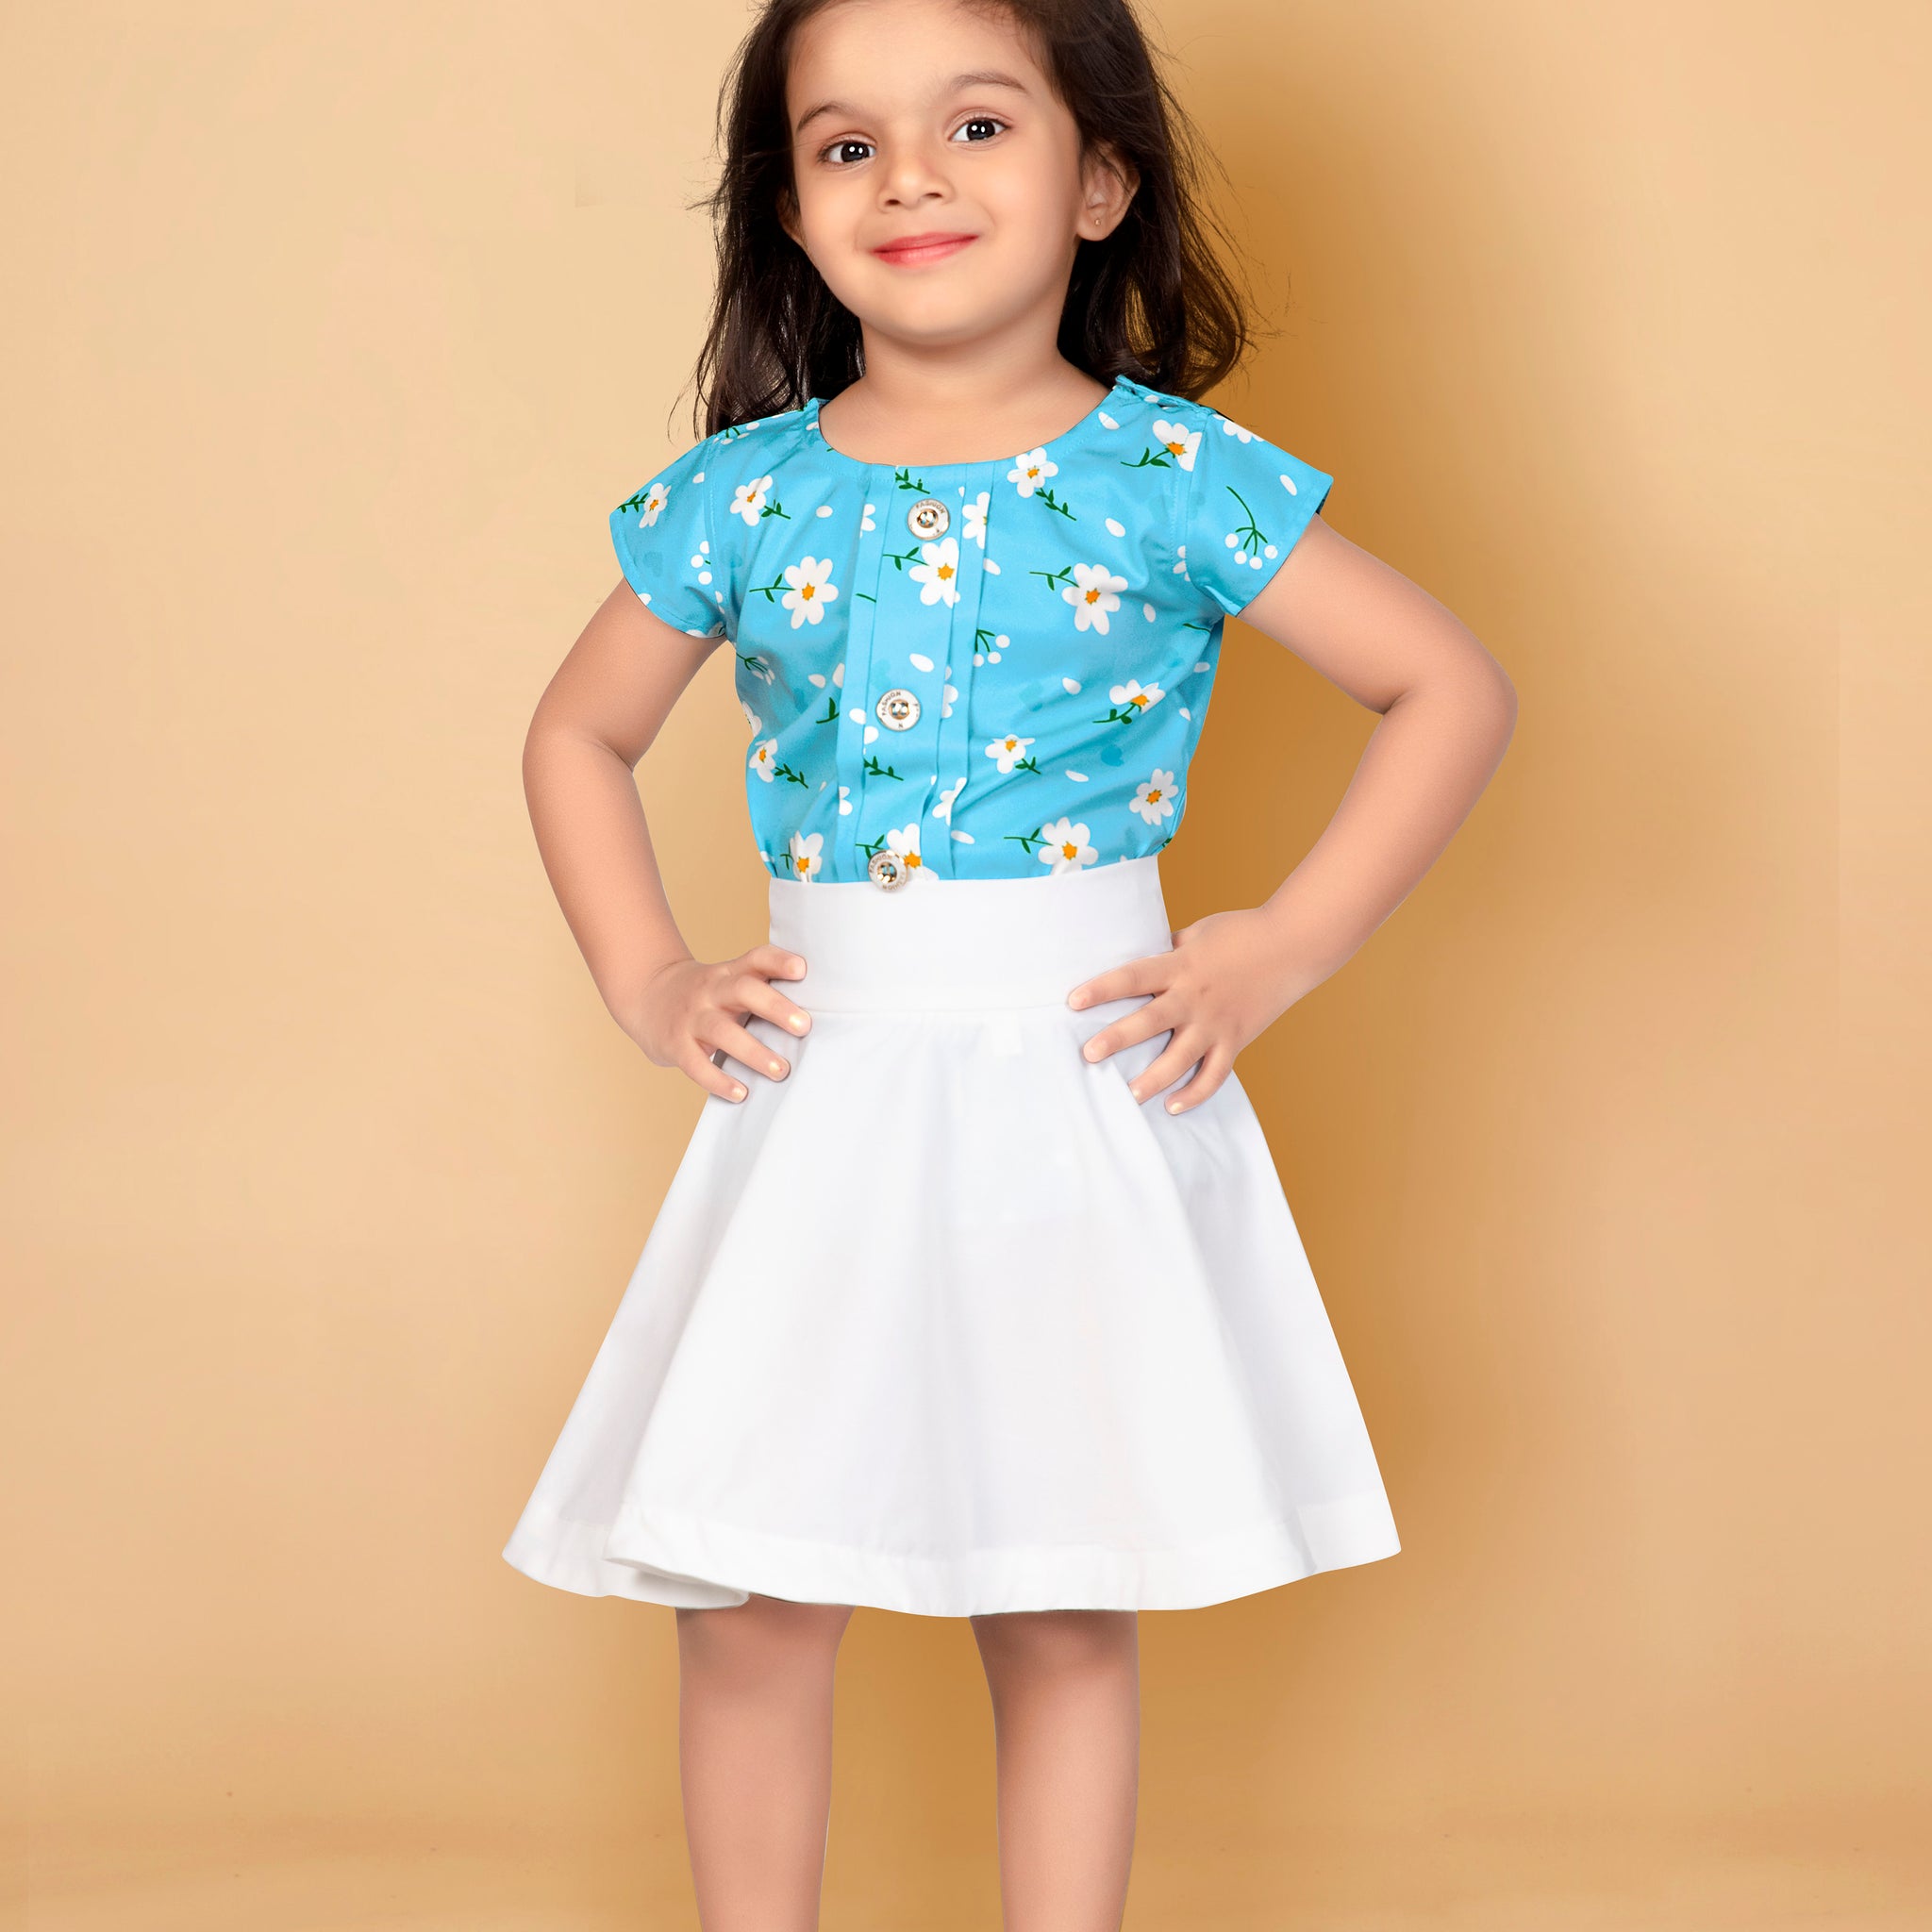 Toddler Girl's Floral Printed Top with Flared Knee-Length Skirt